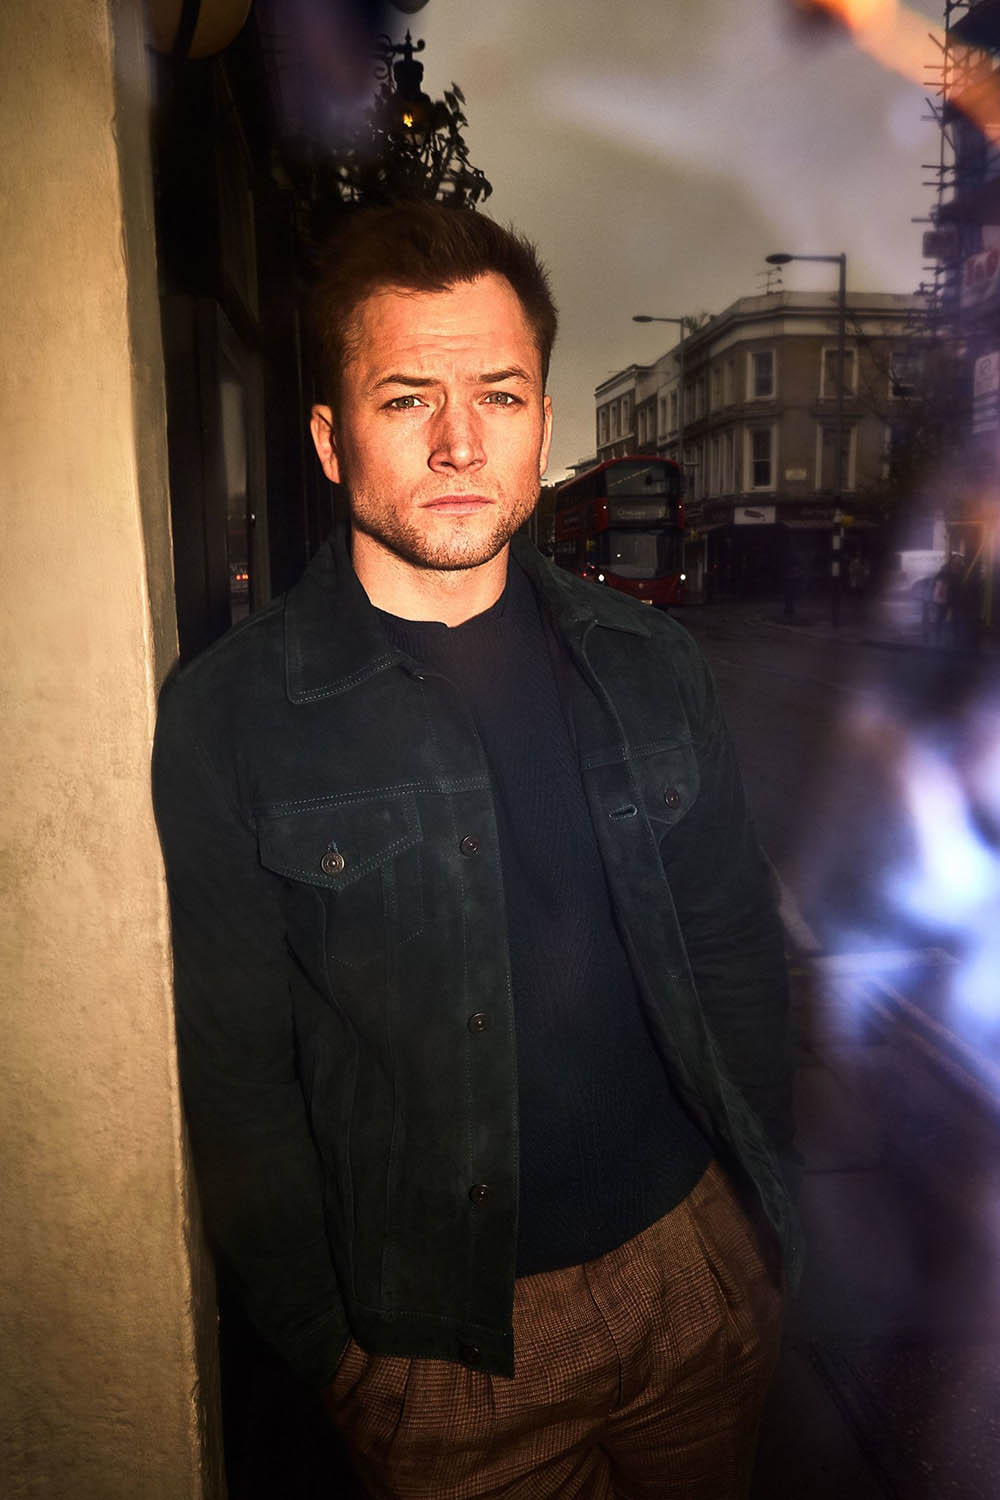 Taron Egerton by Max Montgomery for Flaunt Magazine Issue 165